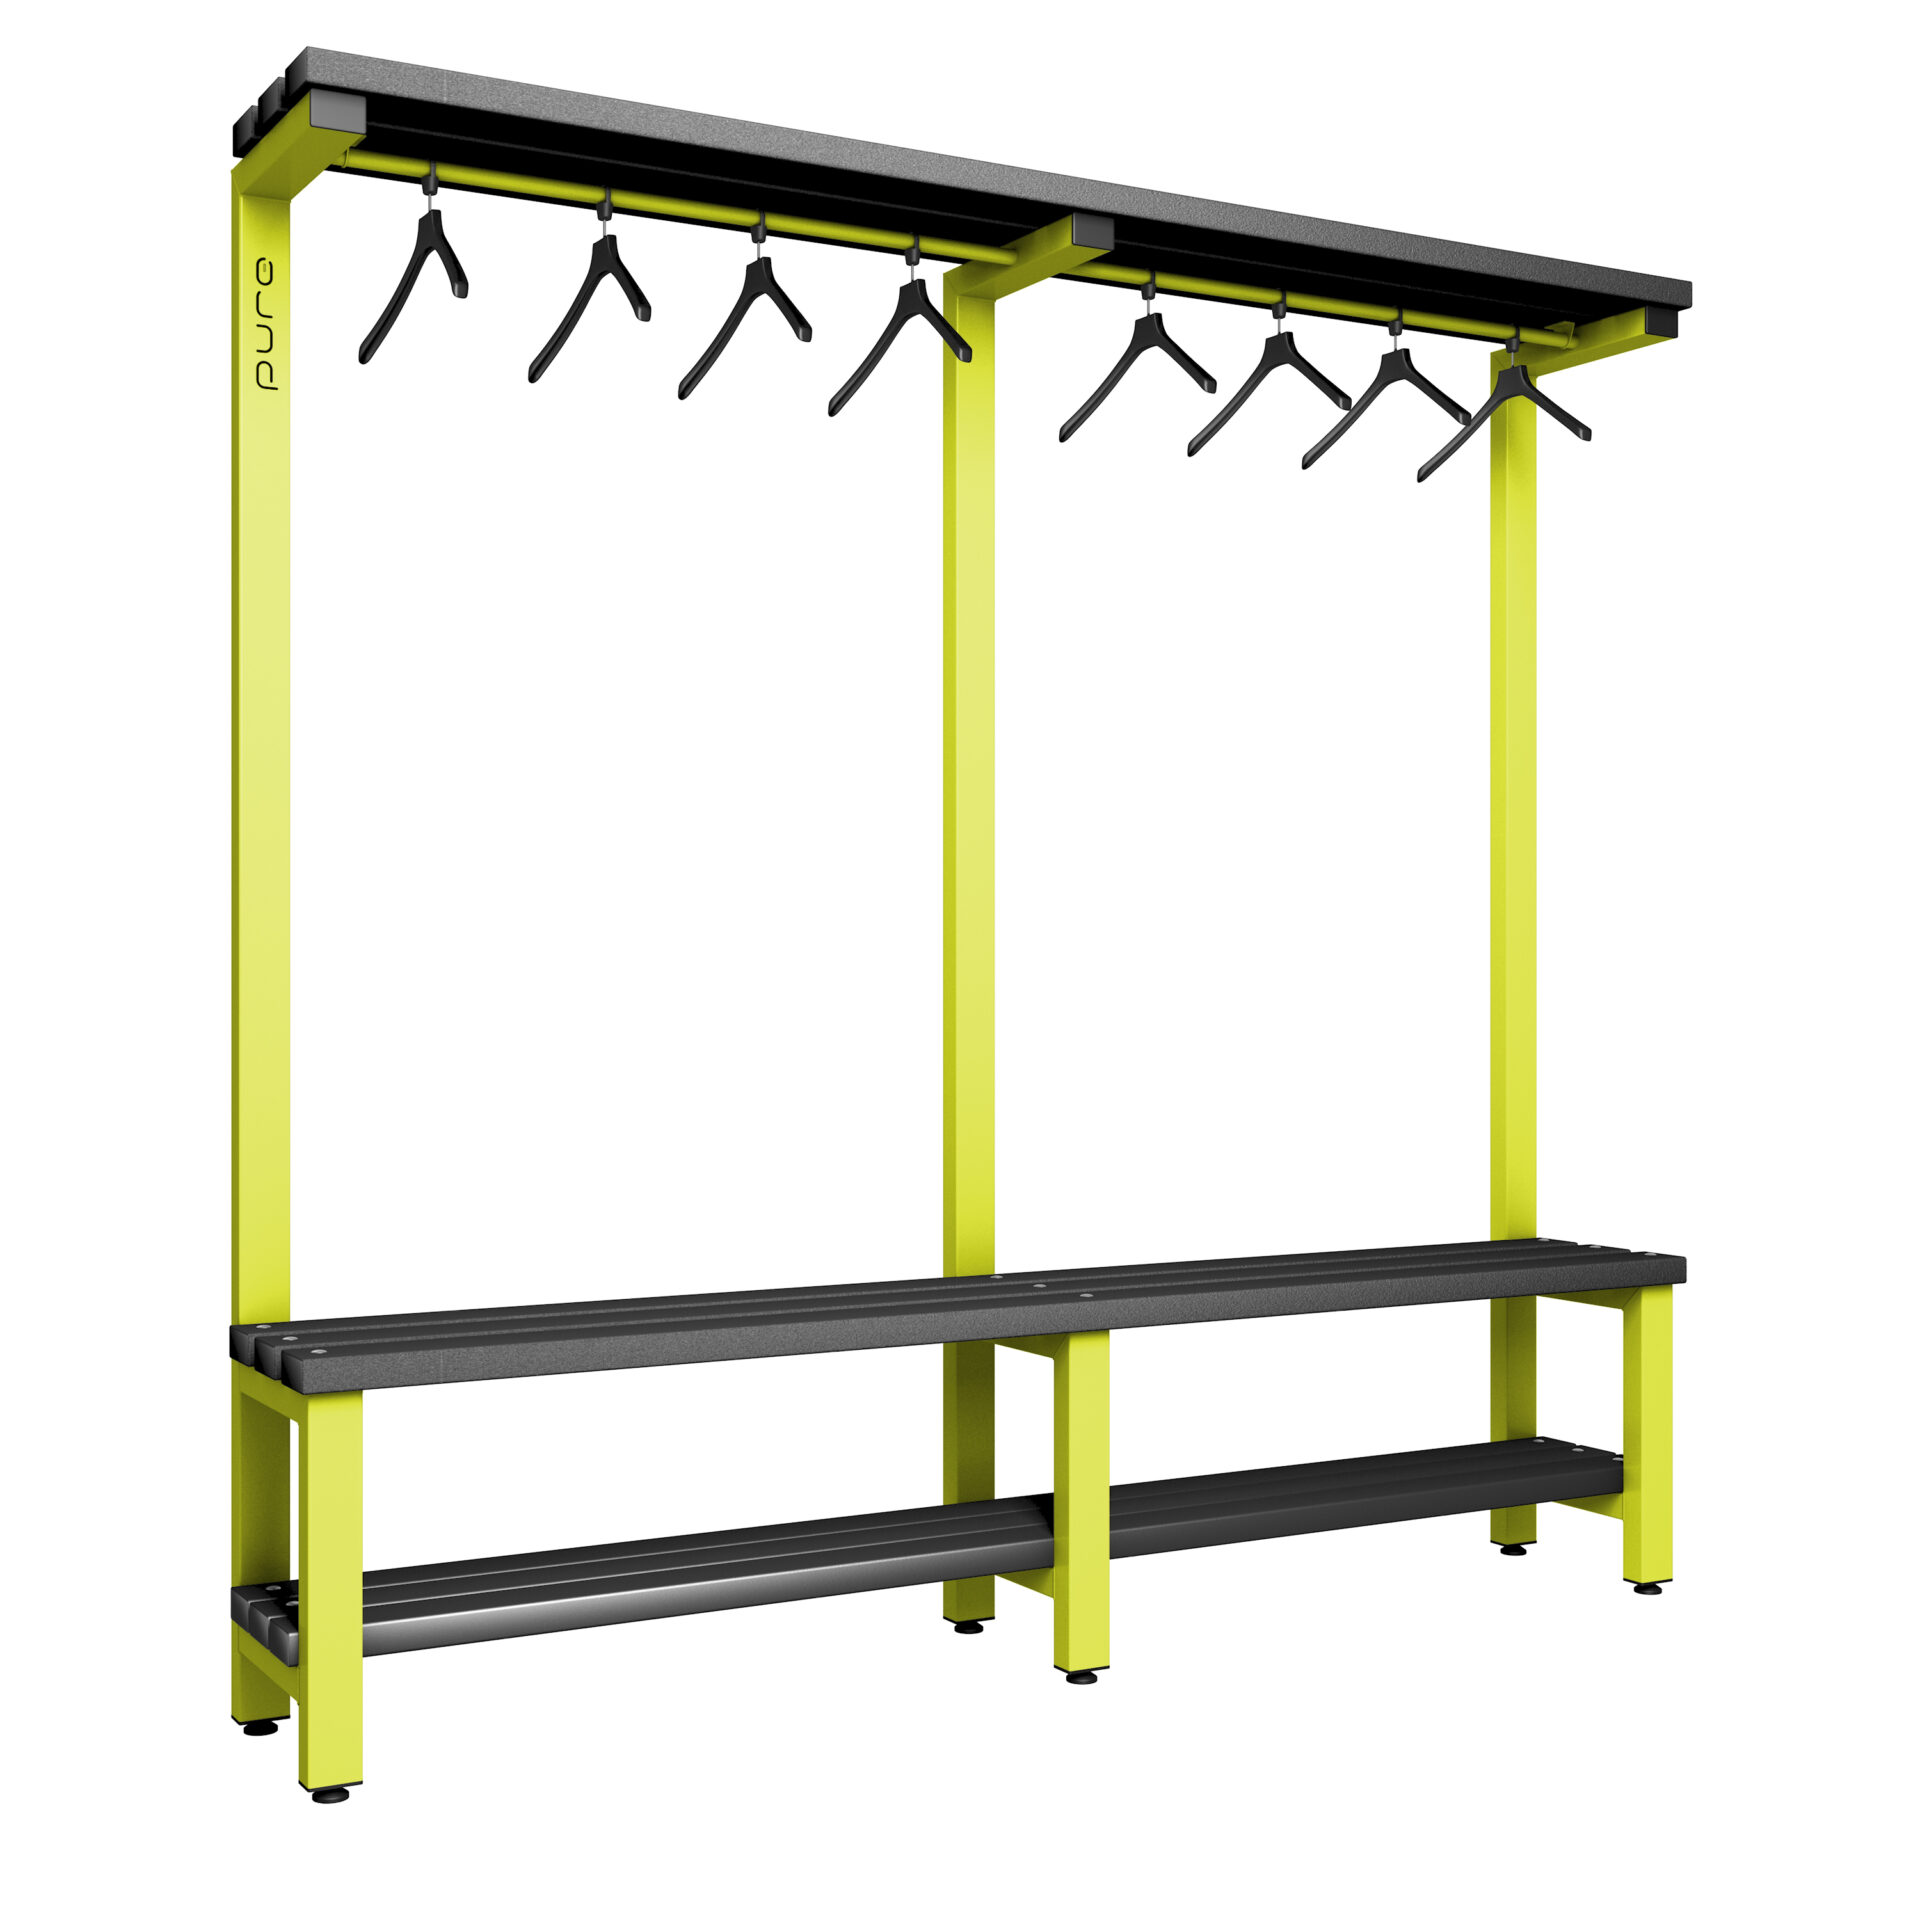 Pure Carbon Zero Single Sided 2000mm Overhead Hanging Bench With Shoe Shelf